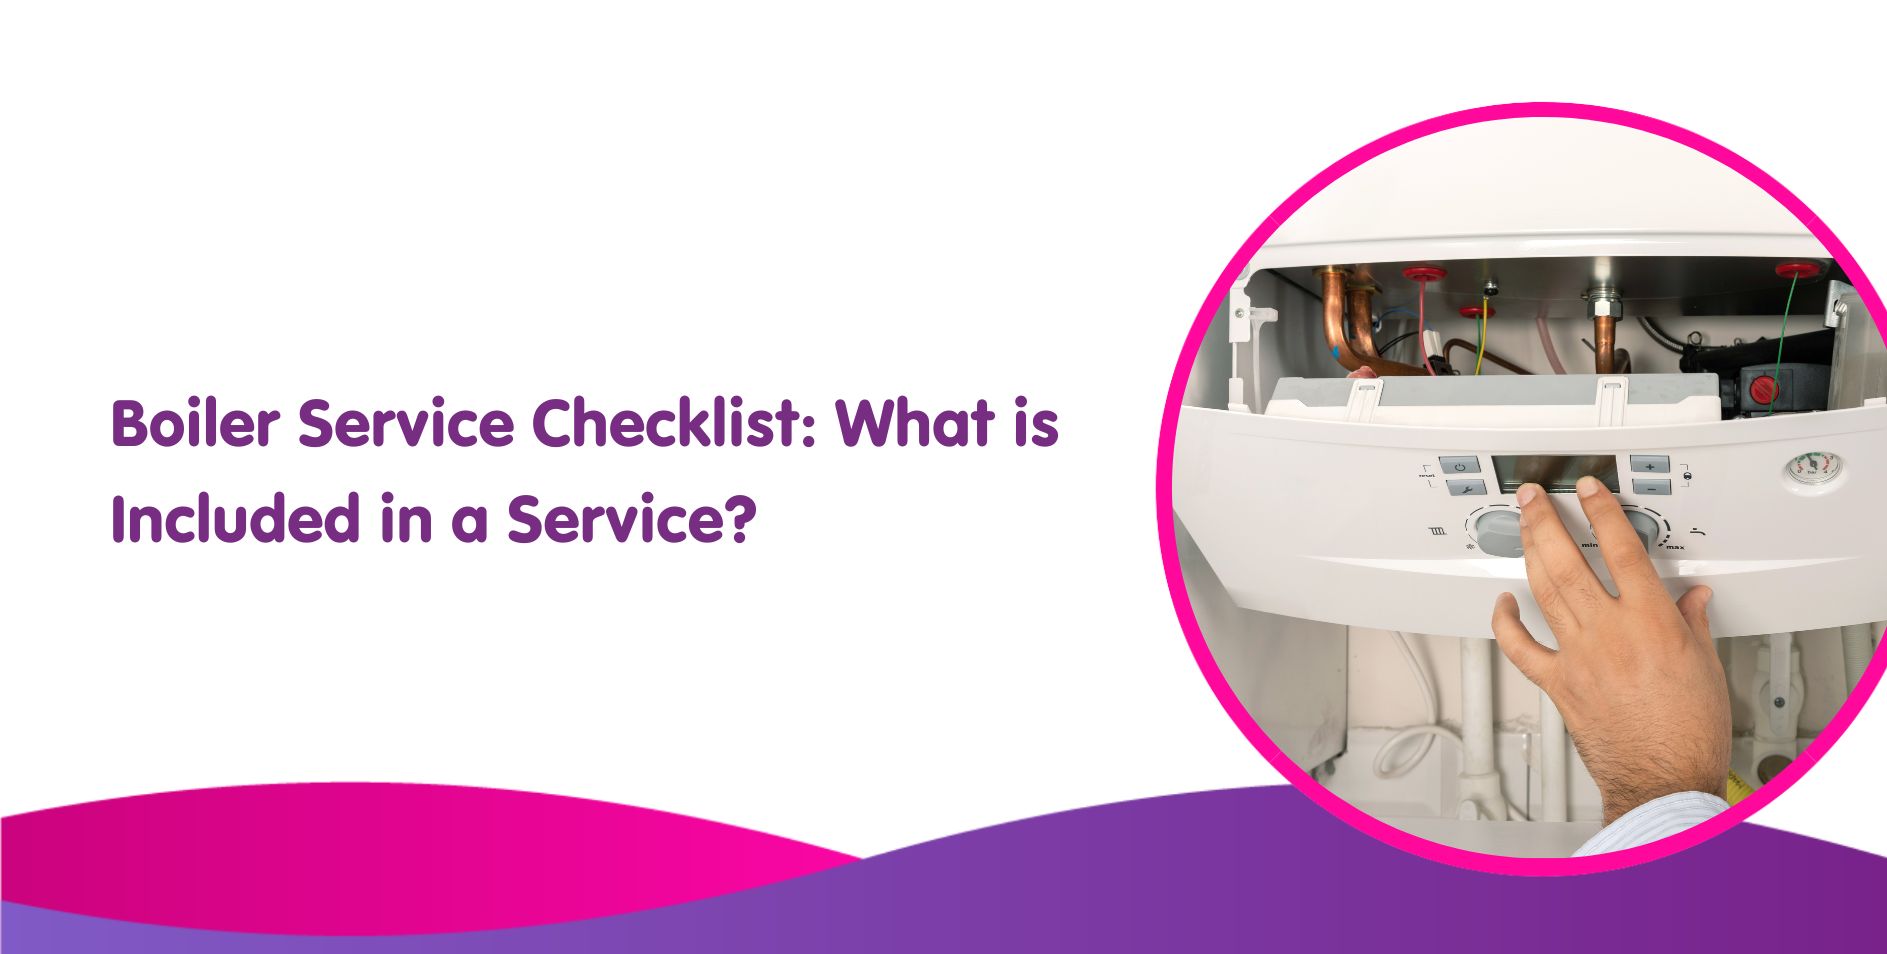 Boiler Service Checklist & What Does a Boiler Service Include?